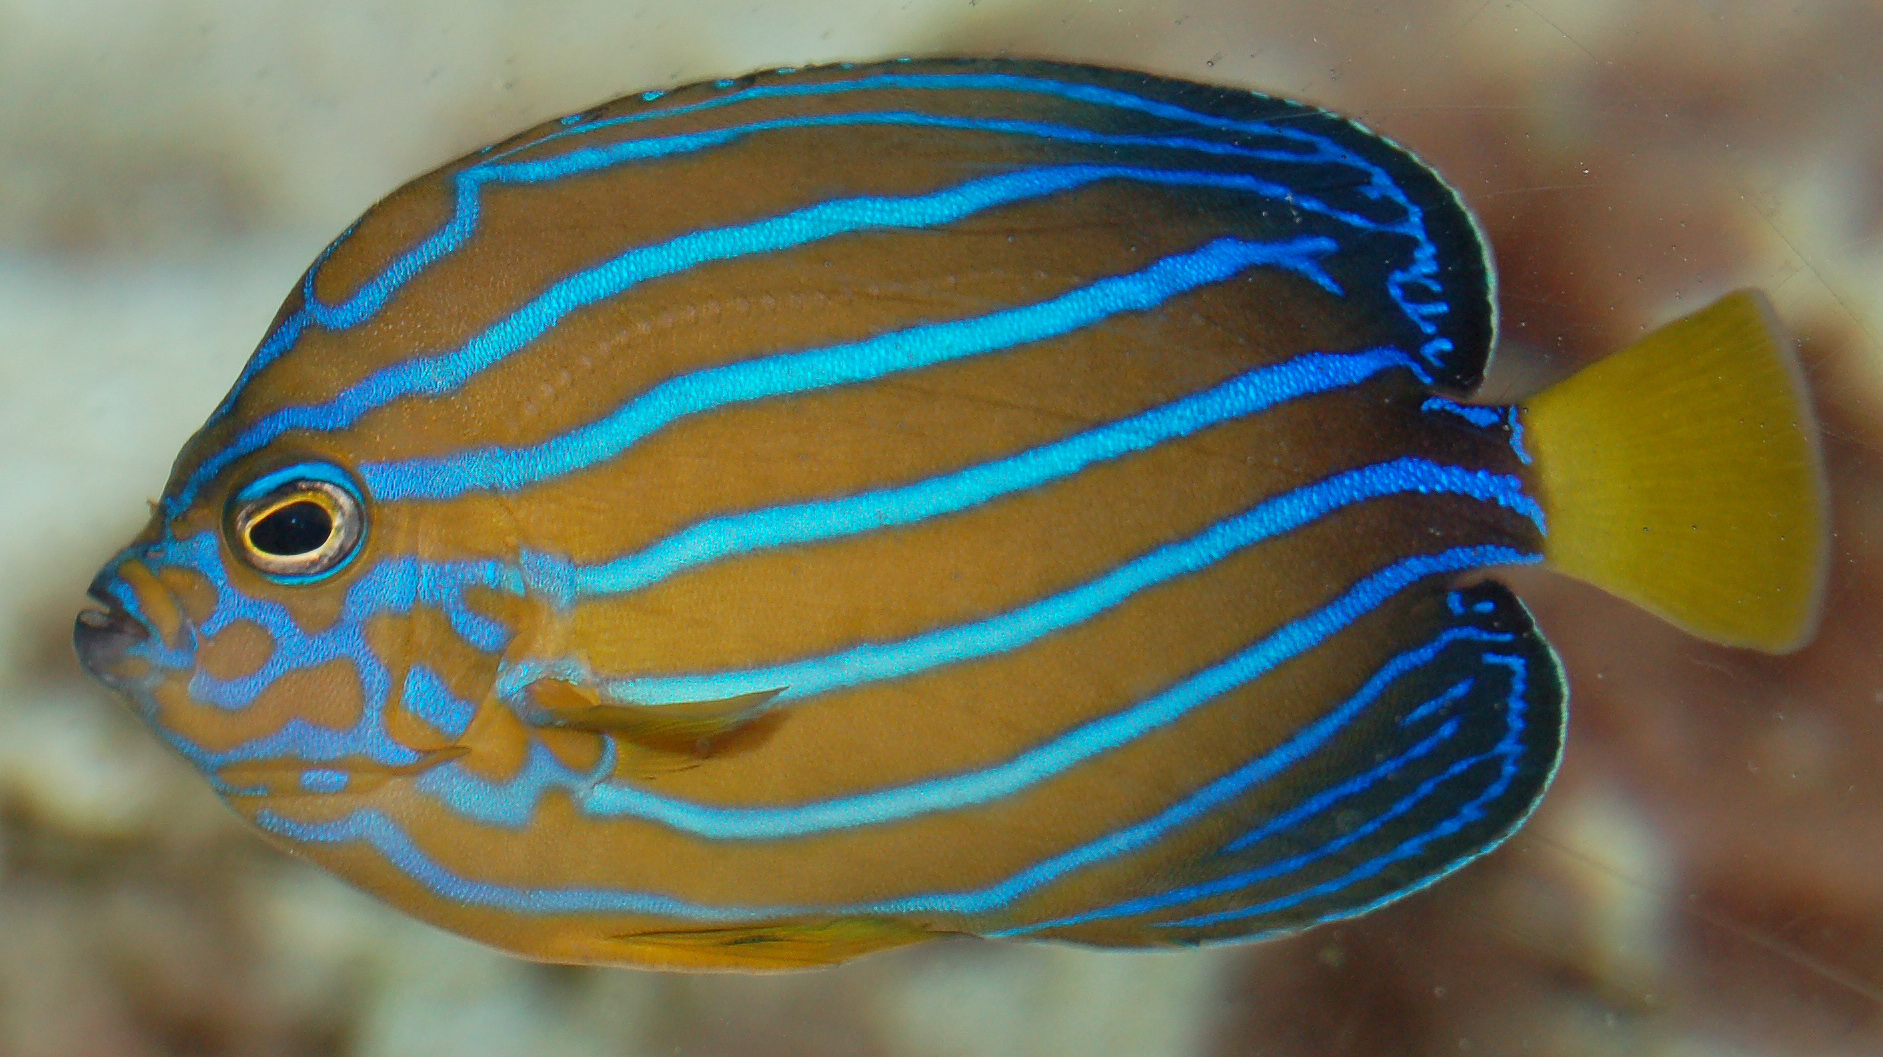 Blue-ringed angelfish Most Beautiful Fish in the World